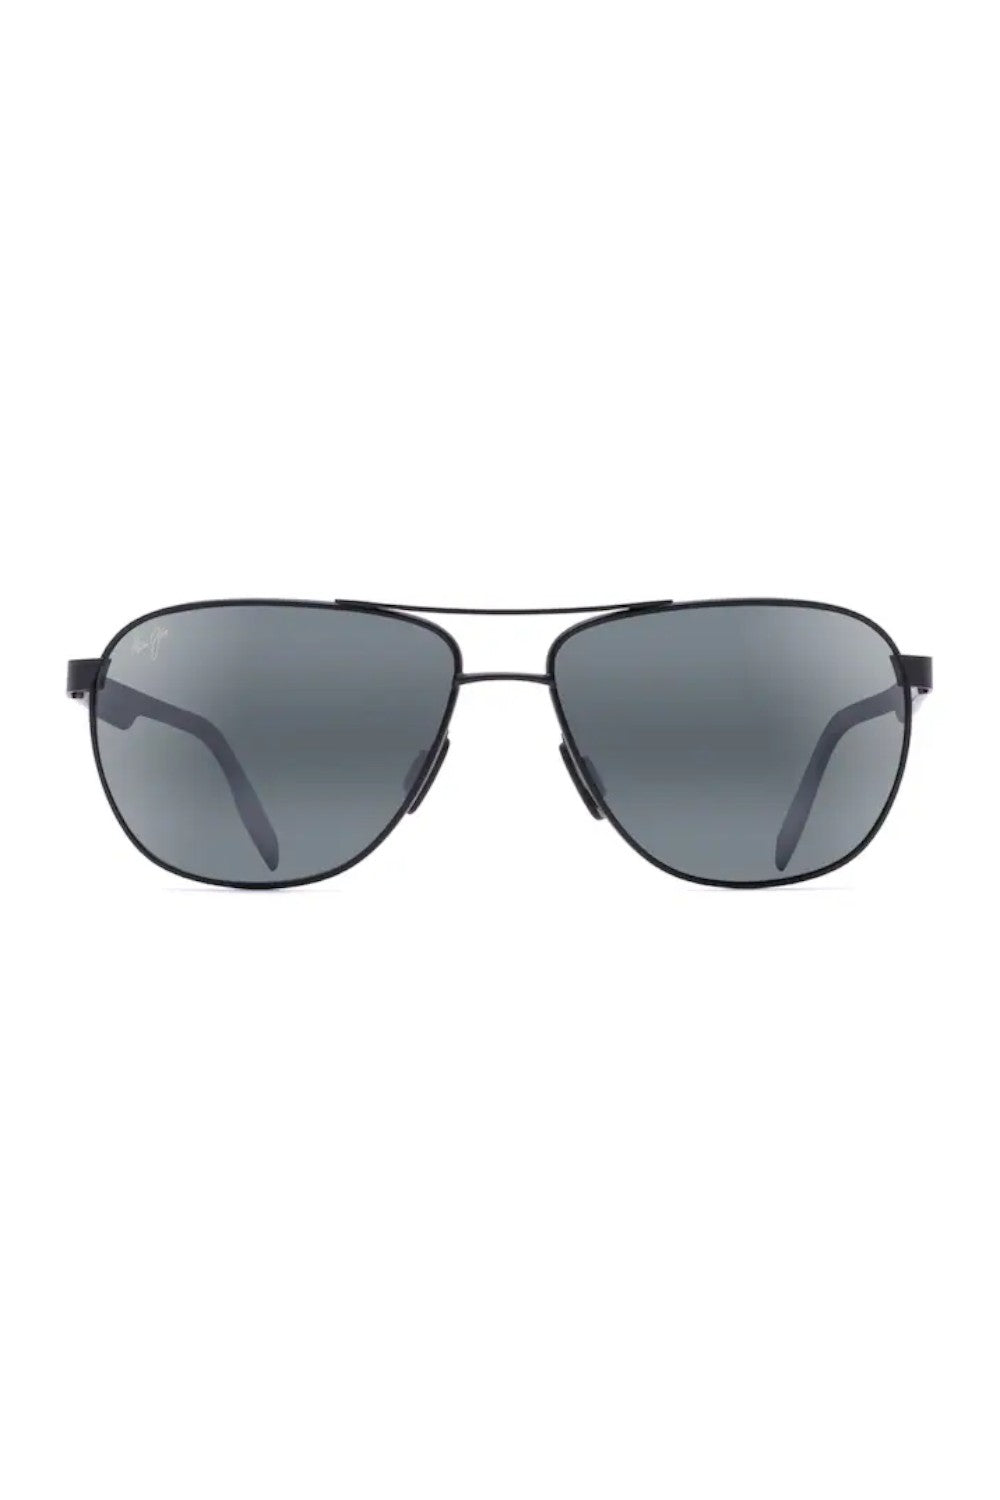 This refined aviator style features classic design constructed from monel metal and nickel silver with SuperThin Glass lenses. The Castles bring a style that look great as both men's and women's aviator sunglasses and are a great choice for consumers demanding a durable, comfortable, high-performing frame.